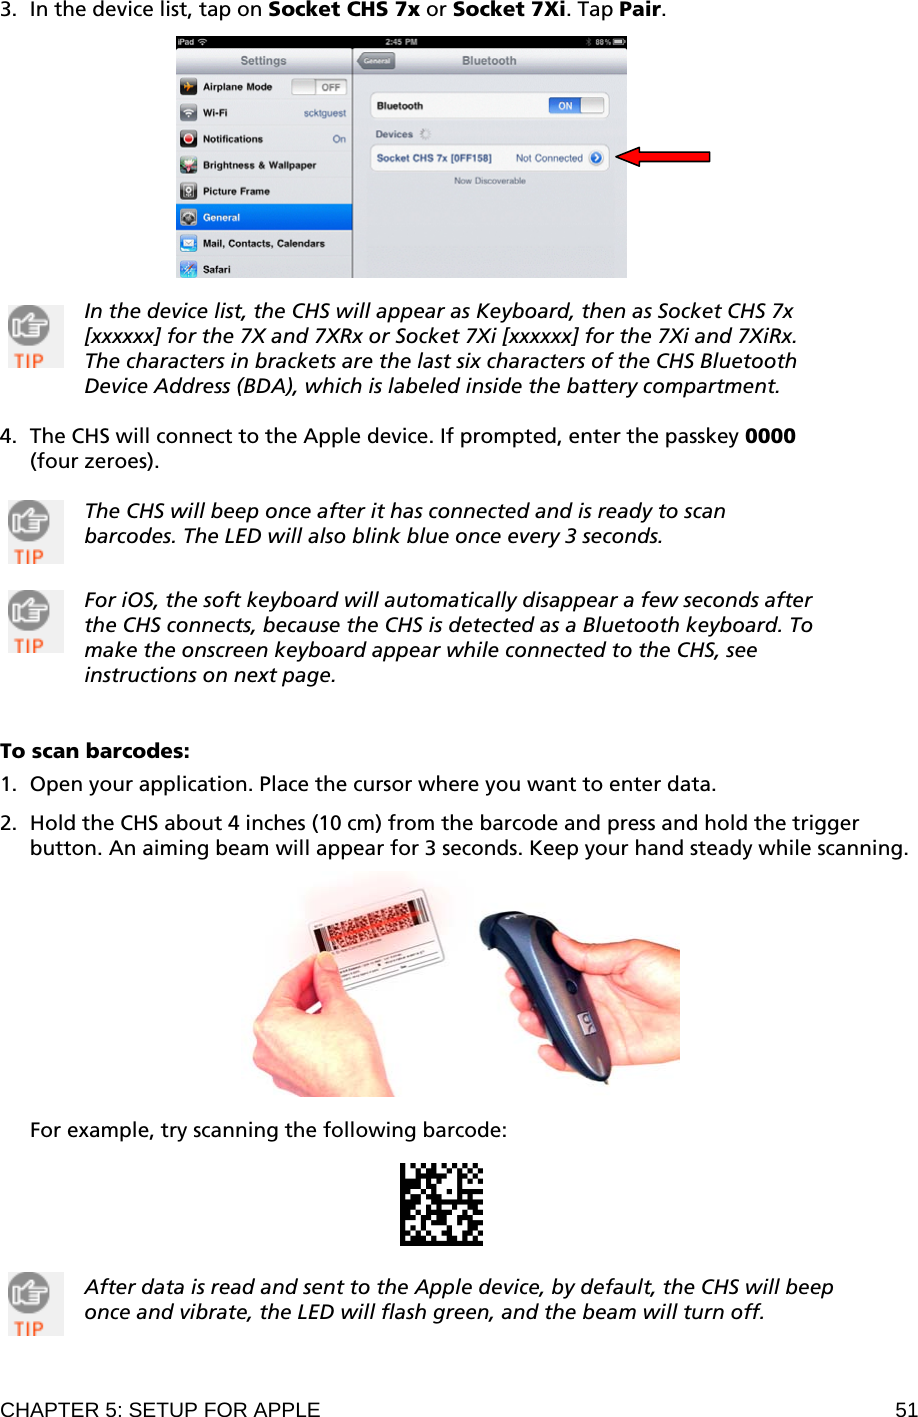 CHAPTER 5: SETUP FOR APPLE  51 3. In the device list, tap on Socket CHS 7x or Socket 7Xi. Tap Pair.    In the device list, the CHS will appear as Keyboard, then as Socket CHS 7x [xxxxxx] for the 7X and 7XRx or Socket 7Xi [xxxxxx] for the 7Xi and 7XiRx. The characters in brackets are the last six characters of the CHS Bluetooth Device Address (BDA), which is labeled inside the battery compartment.  4. The CHS will connect to the Apple device. If prompted, enter the passkey 0000 (four zeroes).  The CHS will beep once after it has connected and is ready to scan barcodes. The LED will also blink blue once every 3 seconds.   For iOS, the soft keyboard will automatically disappear a few seconds after the CHS connects, because the CHS is detected as a Bluetooth keyboard. To make the onscreen keyboard appear while connected to the CHS, see instructions on next page.   To scan barcodes:  1. Open your application. Place the cursor where you want to enter data.  2. Hold the CHS about 4 inches (10 cm) from the barcode and press and hold the trigger button. An aiming beam will appear for 3 seconds. Keep your hand steady while scanning.    For example, try scanning the following barcode:     After data is read and sent to the Apple device, by default, the CHS will beep once and vibrate, the LED will flash green, and the beam will turn off.    